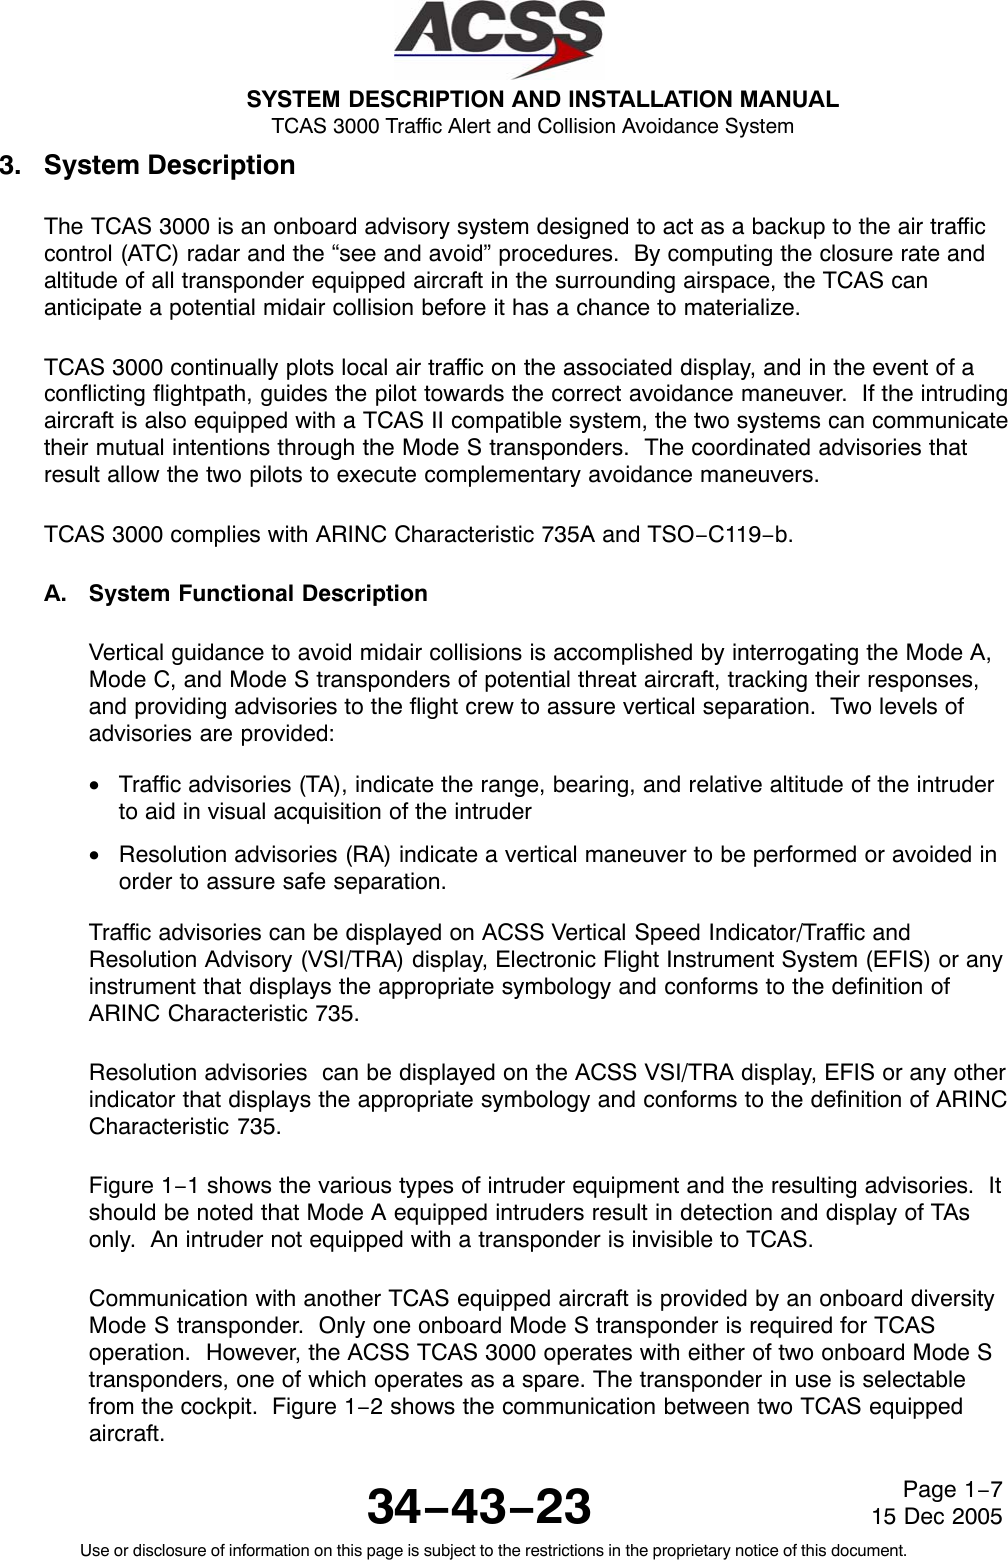 SYSTEM DESCRIPTION AND INSTALLATION MANUAL TCAS 3000 Traffic Alert and Collision Avoidance System34−43−23Use or disclosure of information on this page is subject to the restrictions in the proprietary notice of this document.Page 1−715 Dec 20053. System DescriptionThe TCAS 3000 is an onboard advisory system designed to act as a backup to the air trafficcontrol (ATC) radar and the “see and avoid” procedures.  By computing the closure rate andaltitude of all transponder equipped aircraft in the surrounding airspace, the TCAS cananticipate a potential midair collision before it has a chance to materialize.TCAS 3000 continually plots local air traffic on the associated display, and in the event of aconflicting flightpath, guides the pilot towards the correct avoidance maneuver.  If the intrudingaircraft is also equipped with a TCAS II compatible system, the two systems can communicatetheir mutual intentions through the Mode S transponders.  The coordinated advisories thatresult allow the two pilots to execute complementary avoidance maneuvers.TCAS 3000 complies with ARINC Characteristic 735A and TSO−C119−b.A. System Functional DescriptionVertical guidance to avoid midair collisions is accomplished by interrogating the Mode A,Mode C, and Mode S transponders of potential threat aircraft, tracking their responses,and providing advisories to the flight crew to assure vertical separation.  Two levels ofadvisories are provided:•Traffic advisories (TA), indicate the range, bearing, and relative altitude of the intruderto aid in visual acquisition of the intruder•Resolution advisories (RA) indicate a vertical maneuver to be performed or avoided inorder to assure safe separation.Traffic advisories can be displayed on ACSS Vertical Speed Indicator/Traffic andResolution Advisory (VSI/TRA) display, Electronic Flight Instrument System (EFIS) or anyinstrument that displays the appropriate symbology and conforms to the definition ofARINC Characteristic 735.Resolution advisories  can be displayed on the ACSS VSI/TRA display, EFIS or any otherindicator that displays the appropriate symbology and conforms to the definition of ARINCCharacteristic 735.Figure 1−1 shows the various types of intruder equipment and the resulting advisories.  Itshould be noted that Mode A equipped intruders result in detection and display of TAsonly.  An intruder not equipped with a transponder is invisible to TCAS.Communication with another TCAS equipped aircraft is provided by an onboard diversityMode S transponder.  Only one onboard Mode S transponder is required for TCASoperation.  However, the ACSS TCAS 3000 operates with either of two onboard Mode Stransponders, one of which operates as a spare. The transponder in use is selectablefrom the cockpit.  Figure 1−2 shows the communication between two TCAS equippedaircraft.